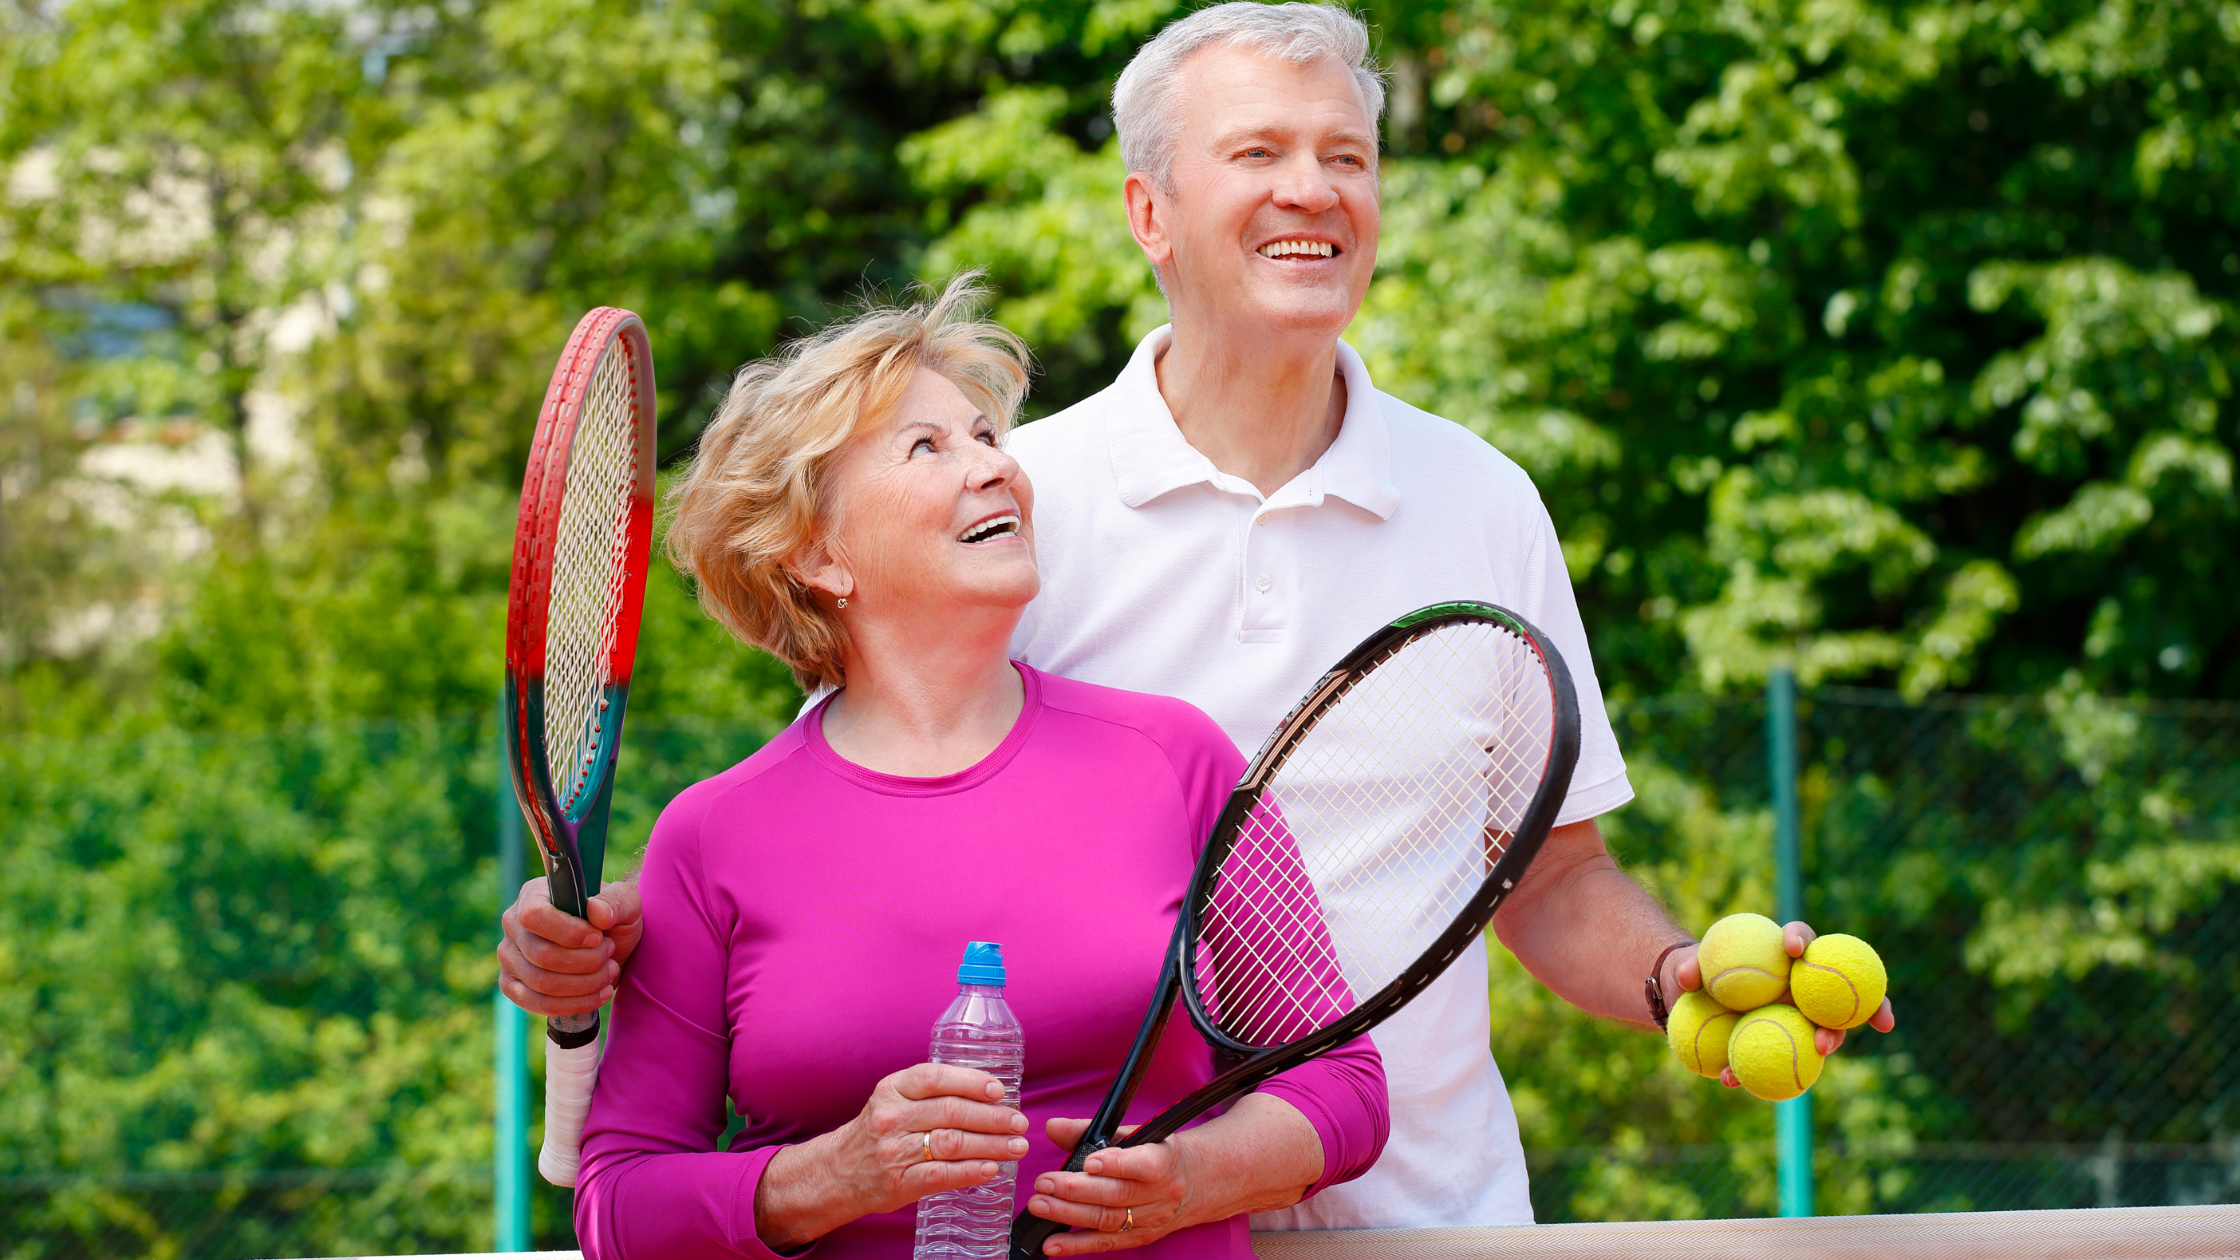 Smiling older couple on a tennis court holding rackets and balls